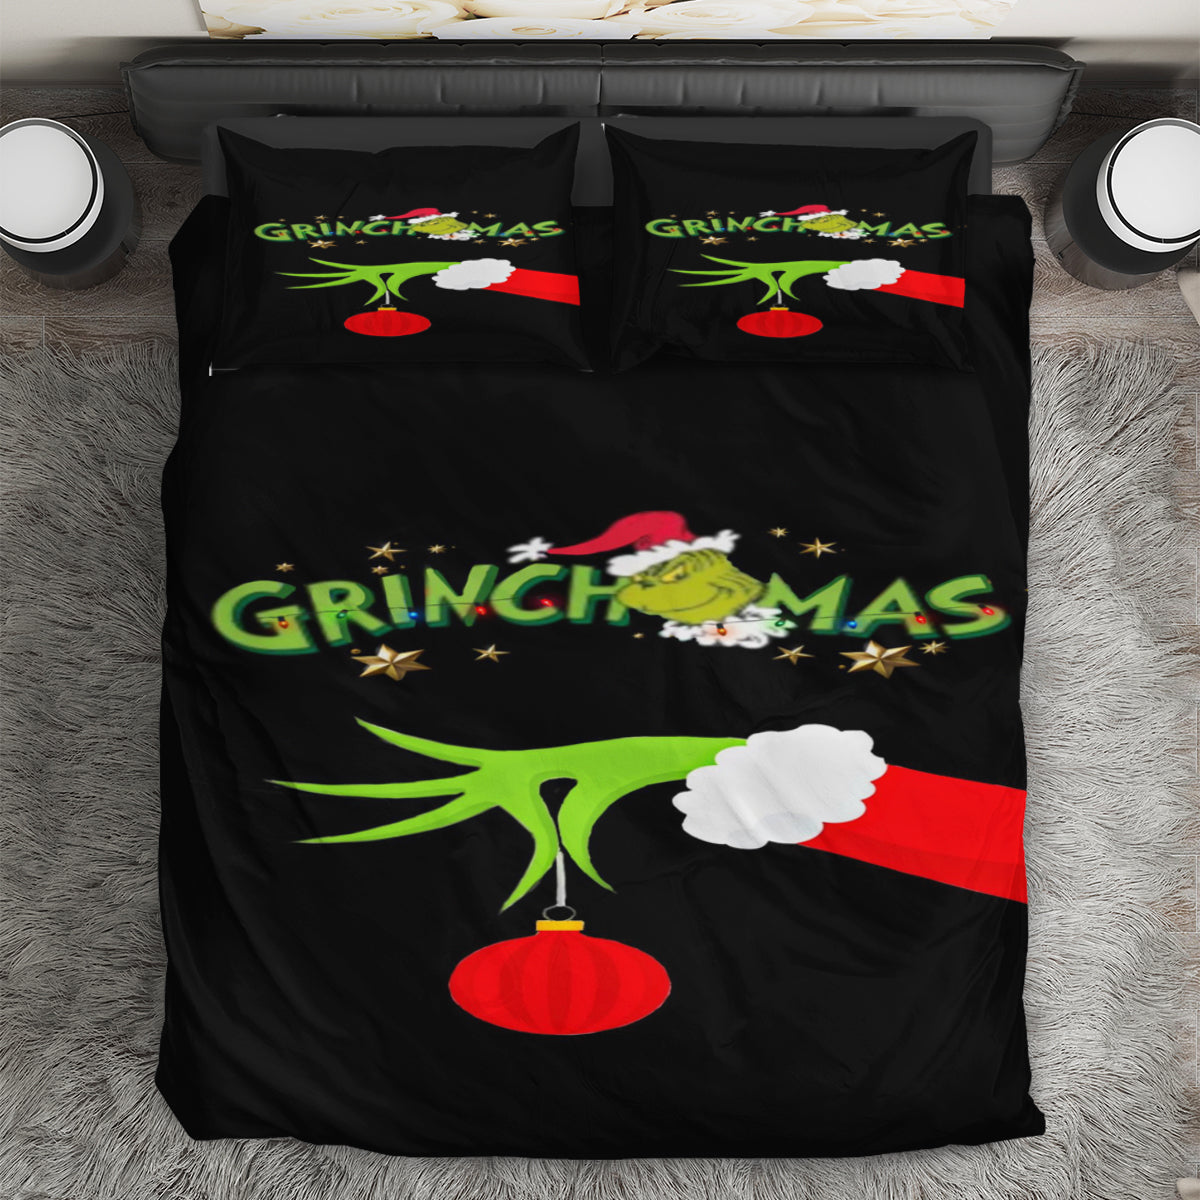 The Grinch Christmas Merry Grinchmas 2 3PCS Bedding Set Duvet Cover And Pillow Cases Gift For Fan